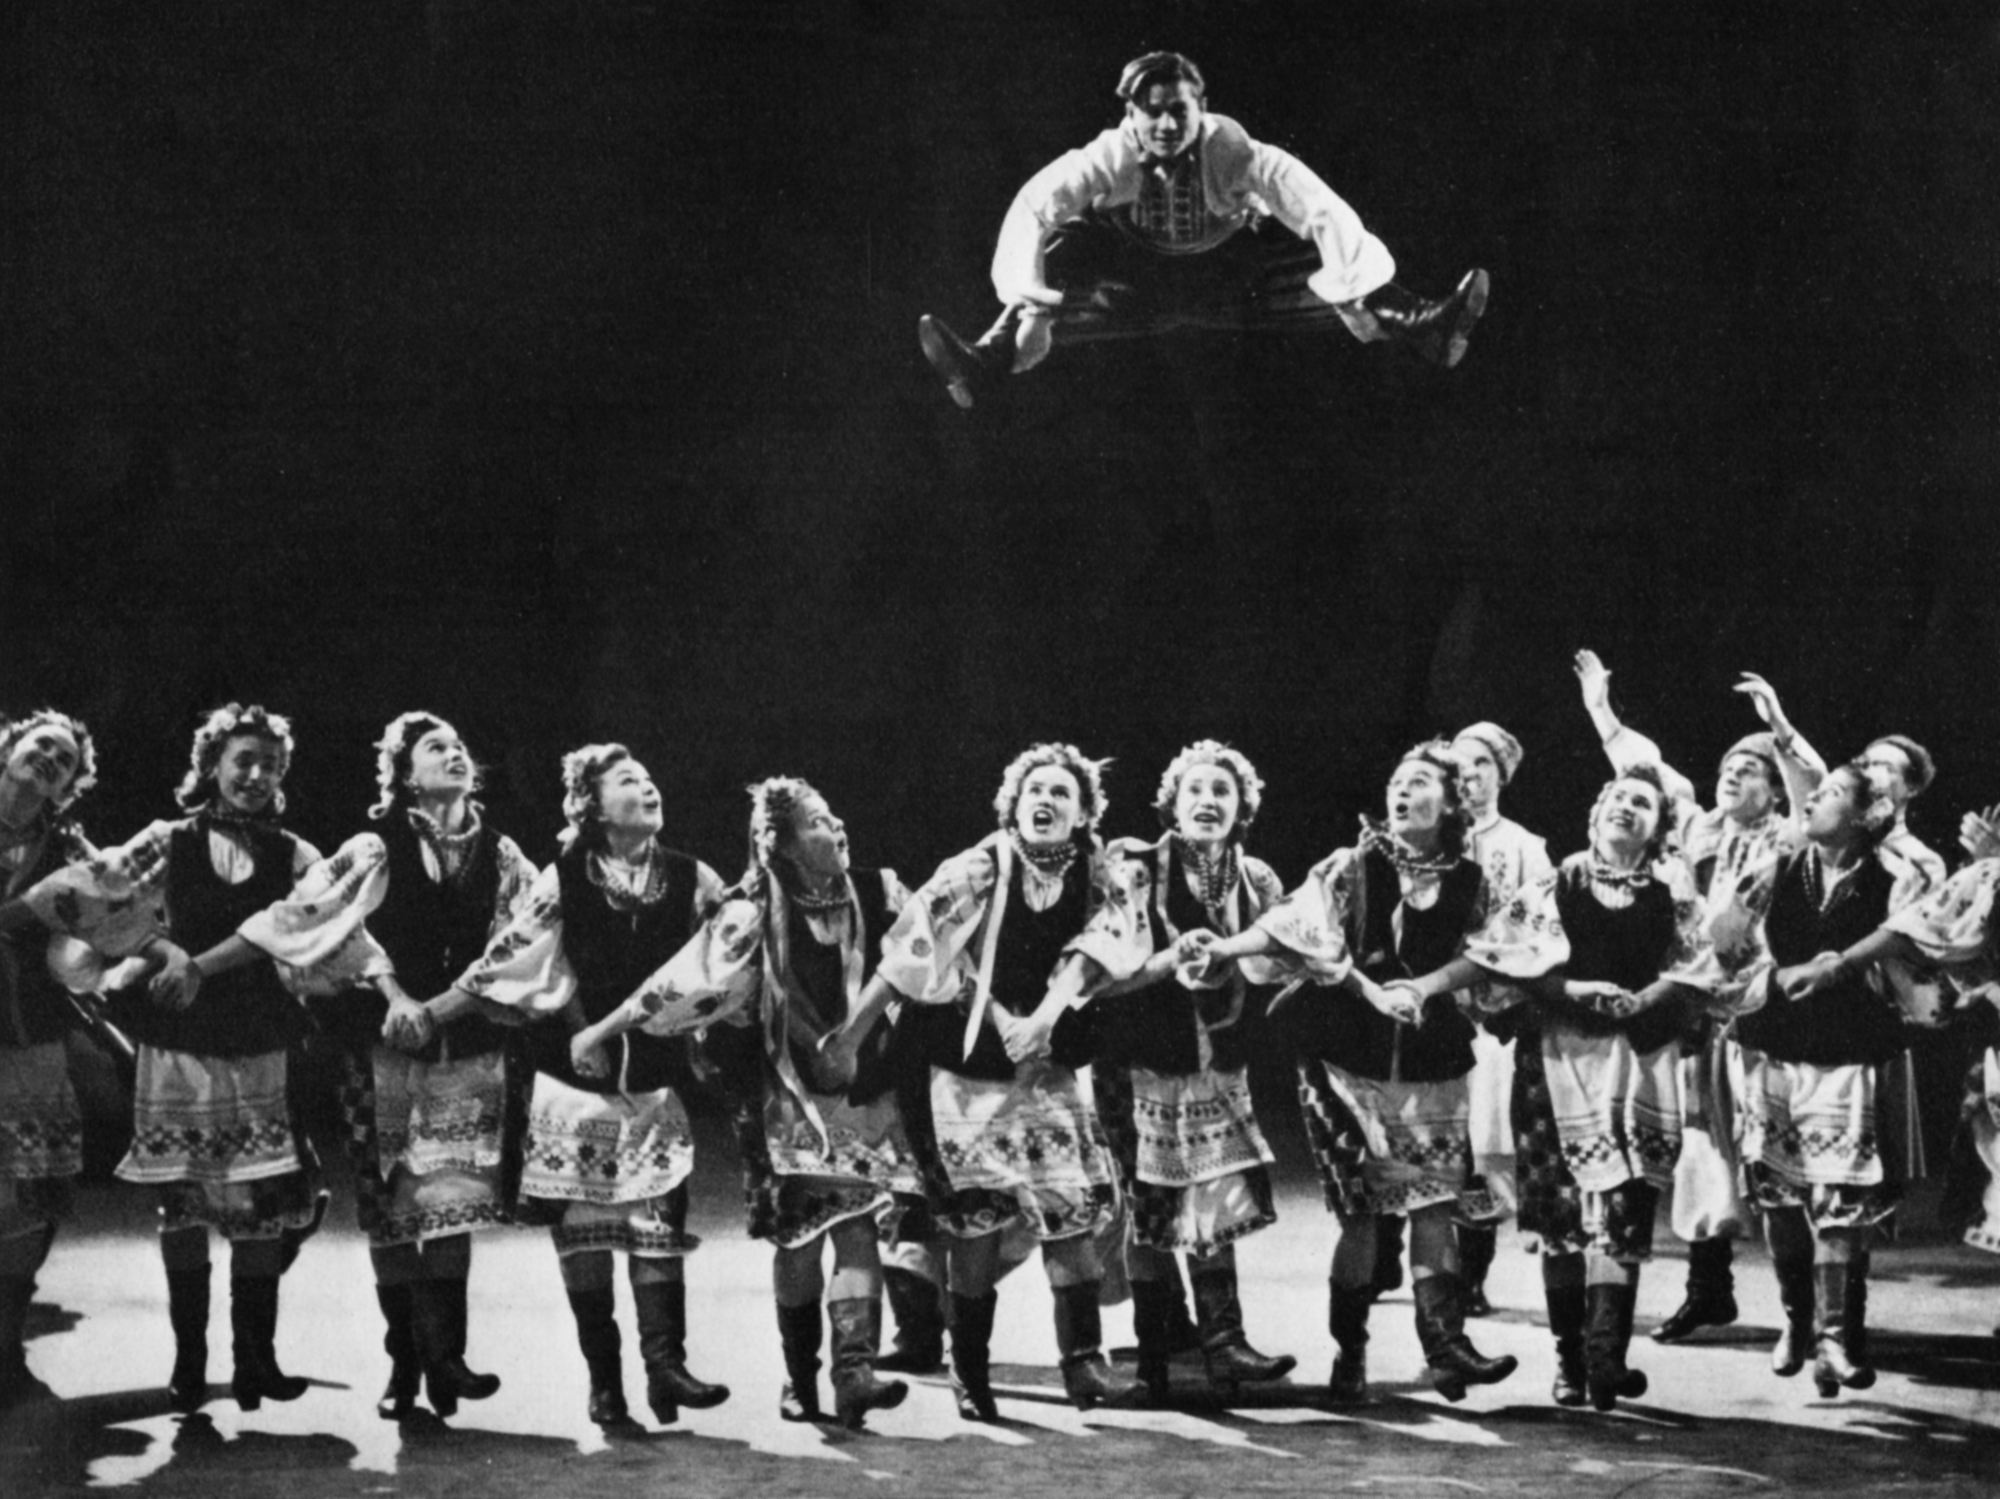 A young male Soviet dancer, his hands on his widely apart legs, soars over 14 other dancers who are holding hands in a line